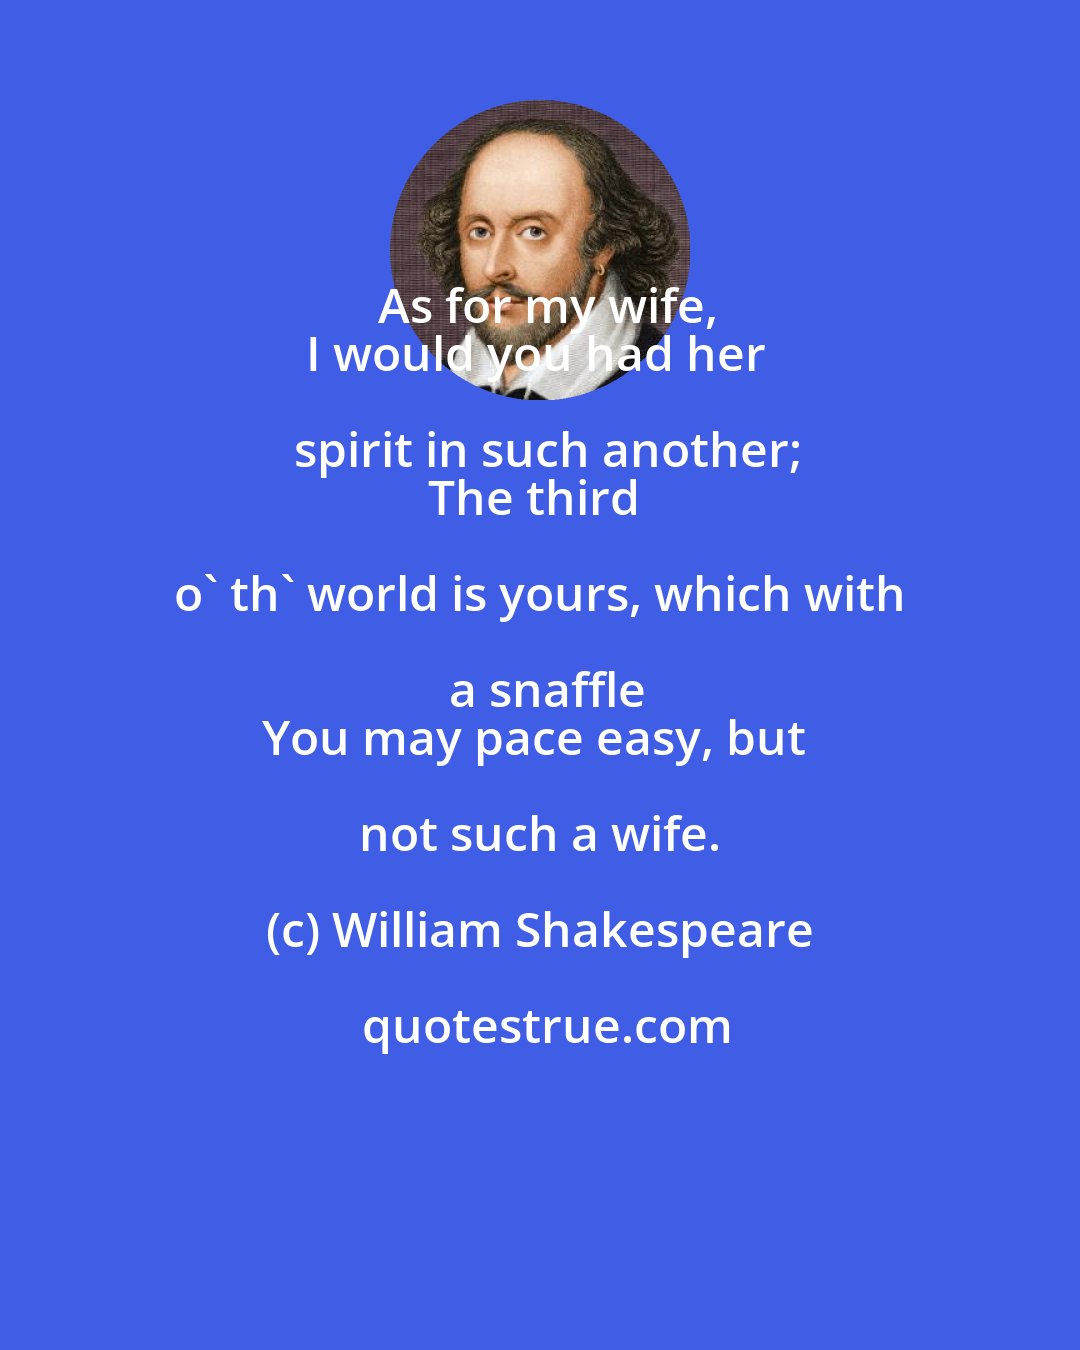 William Shakespeare: As for my wife,
I would you had her spirit in such another;
The third o' th' world is yours, which with a snaffle
You may pace easy, but not such a wife.